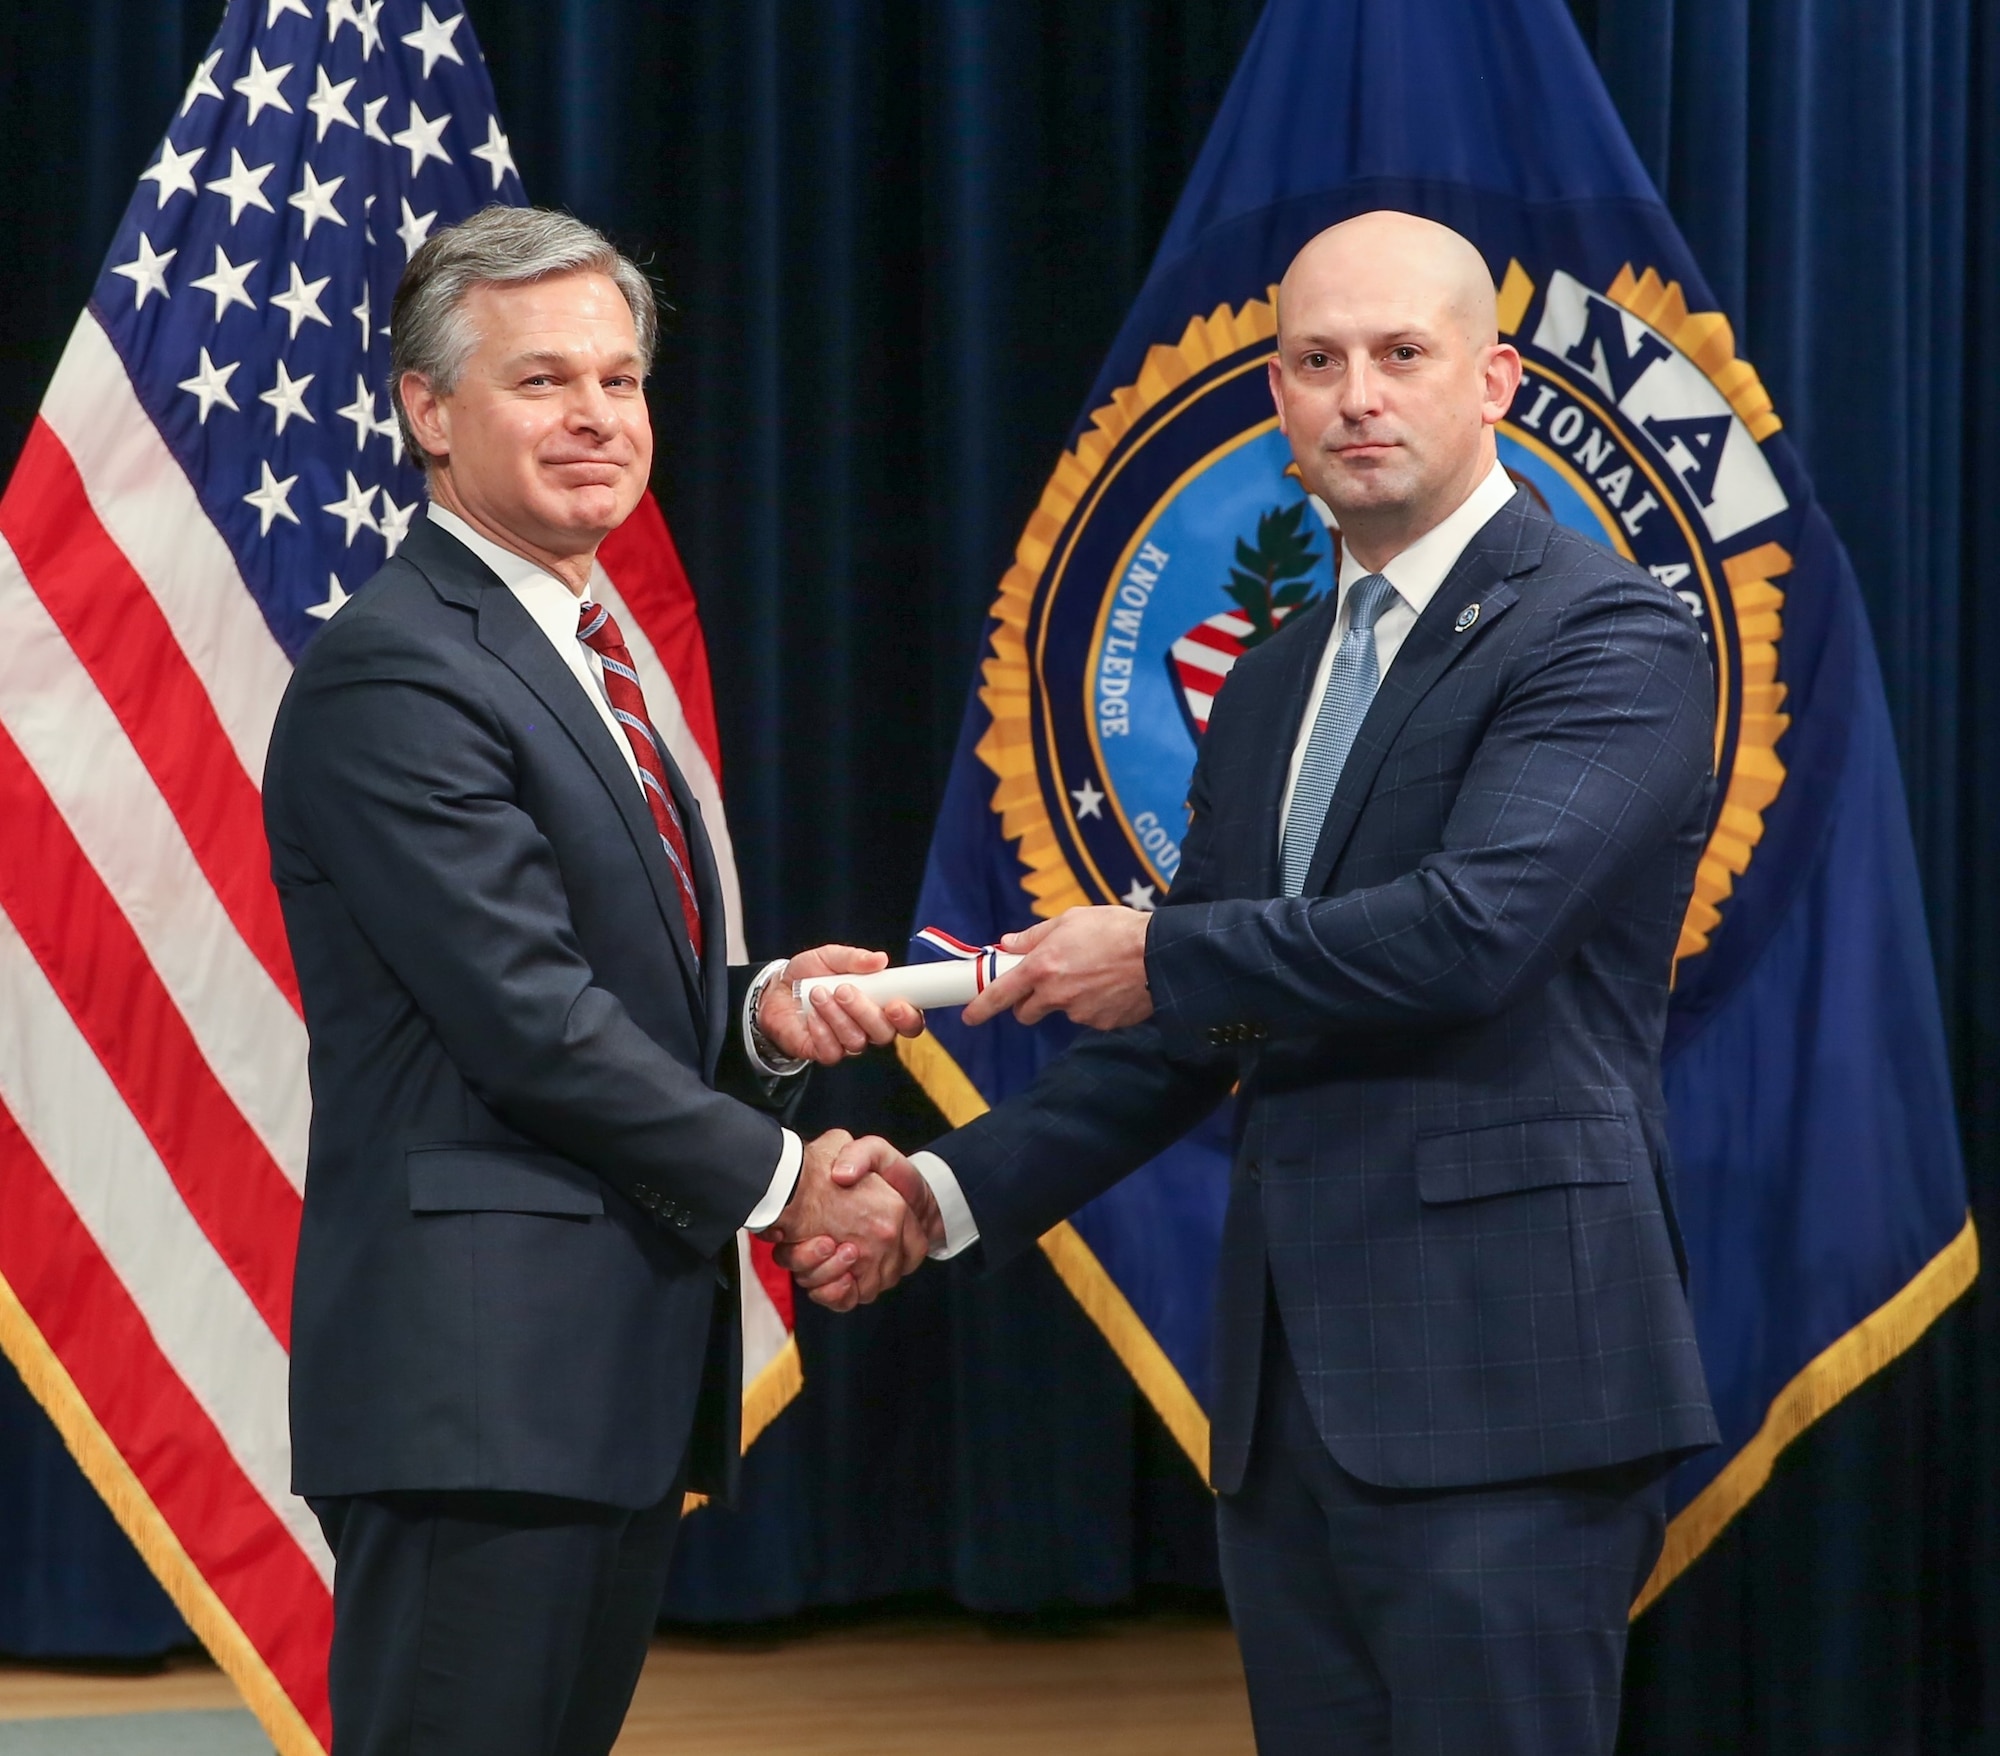 Federal Bureau of Investigation Director Christopher A. Wray, left, presents Office of Special Investigations Special Agent William Glidewell with his diploma Dec. 21, 2021, upon graduating the elite FBI National Academy, Quantico, Va. (FBI NA photo)